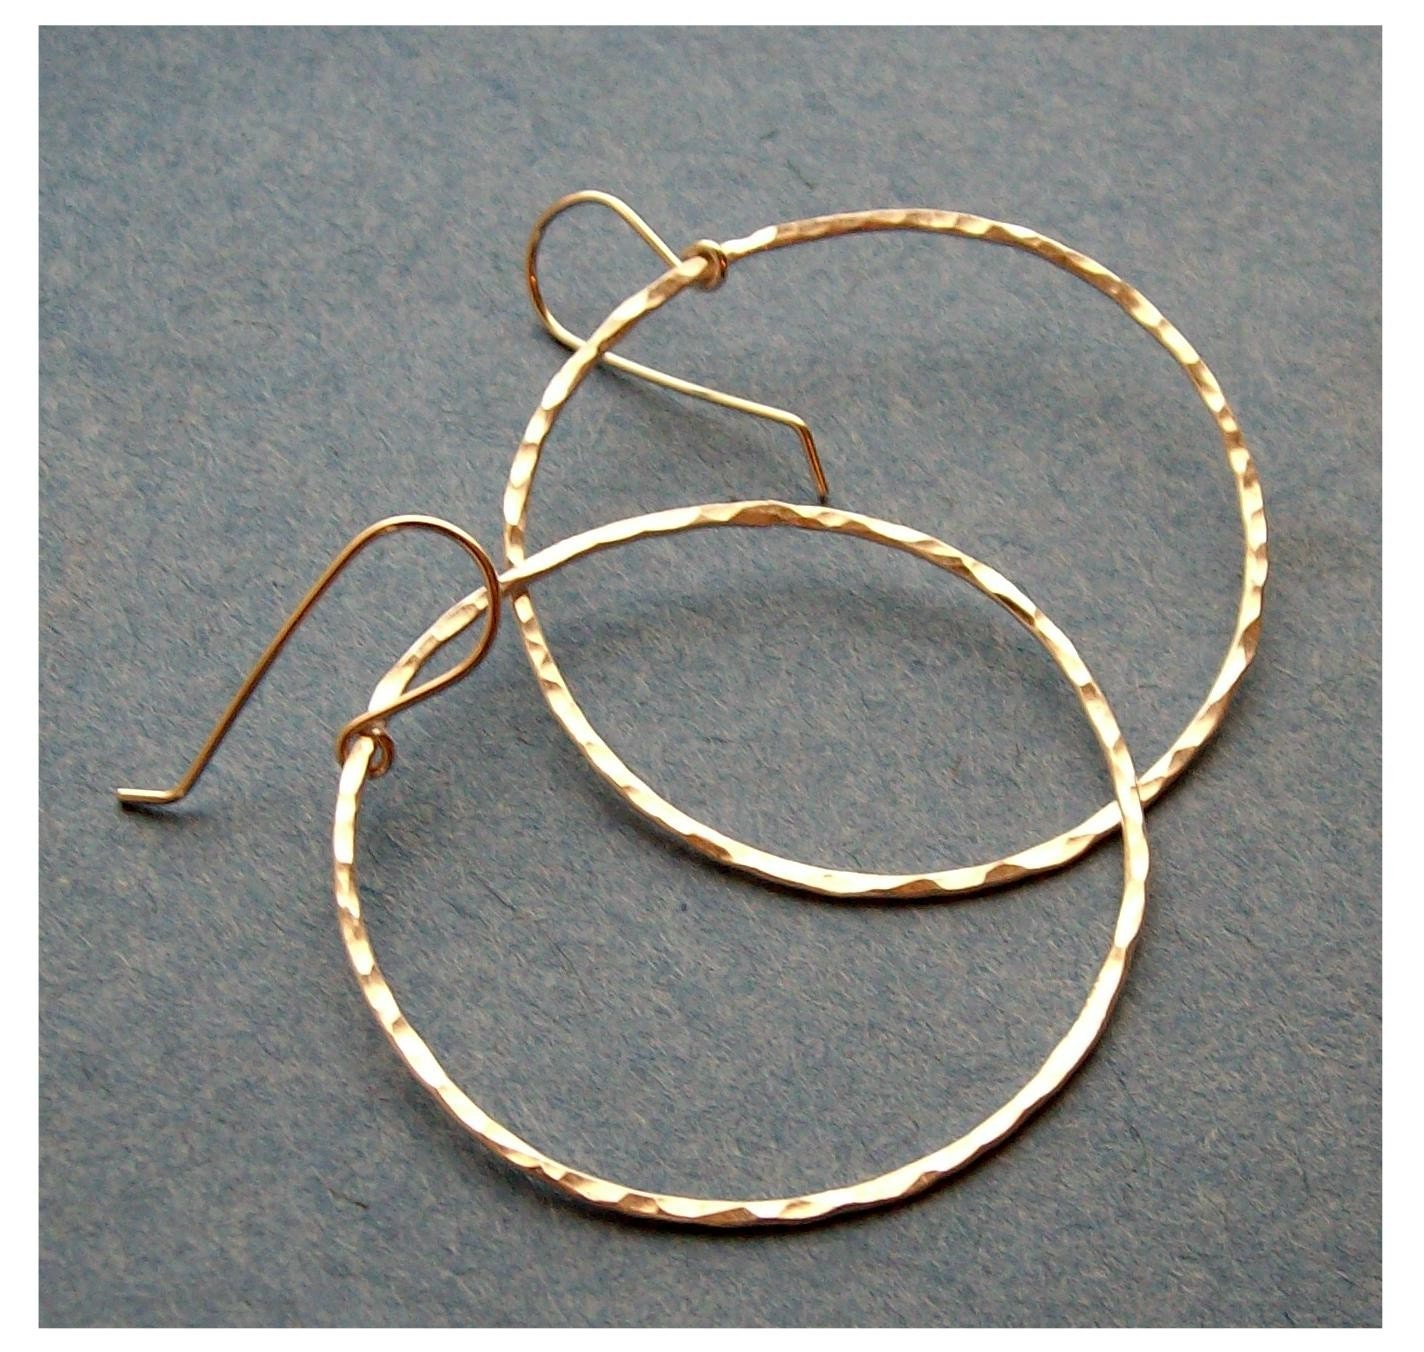 <br />jewelry, earrings, hoop, metal, metalwork, hammered, textured, round, circle, organic, pawandclawdesigns, fine silver, sterling silver, rustic